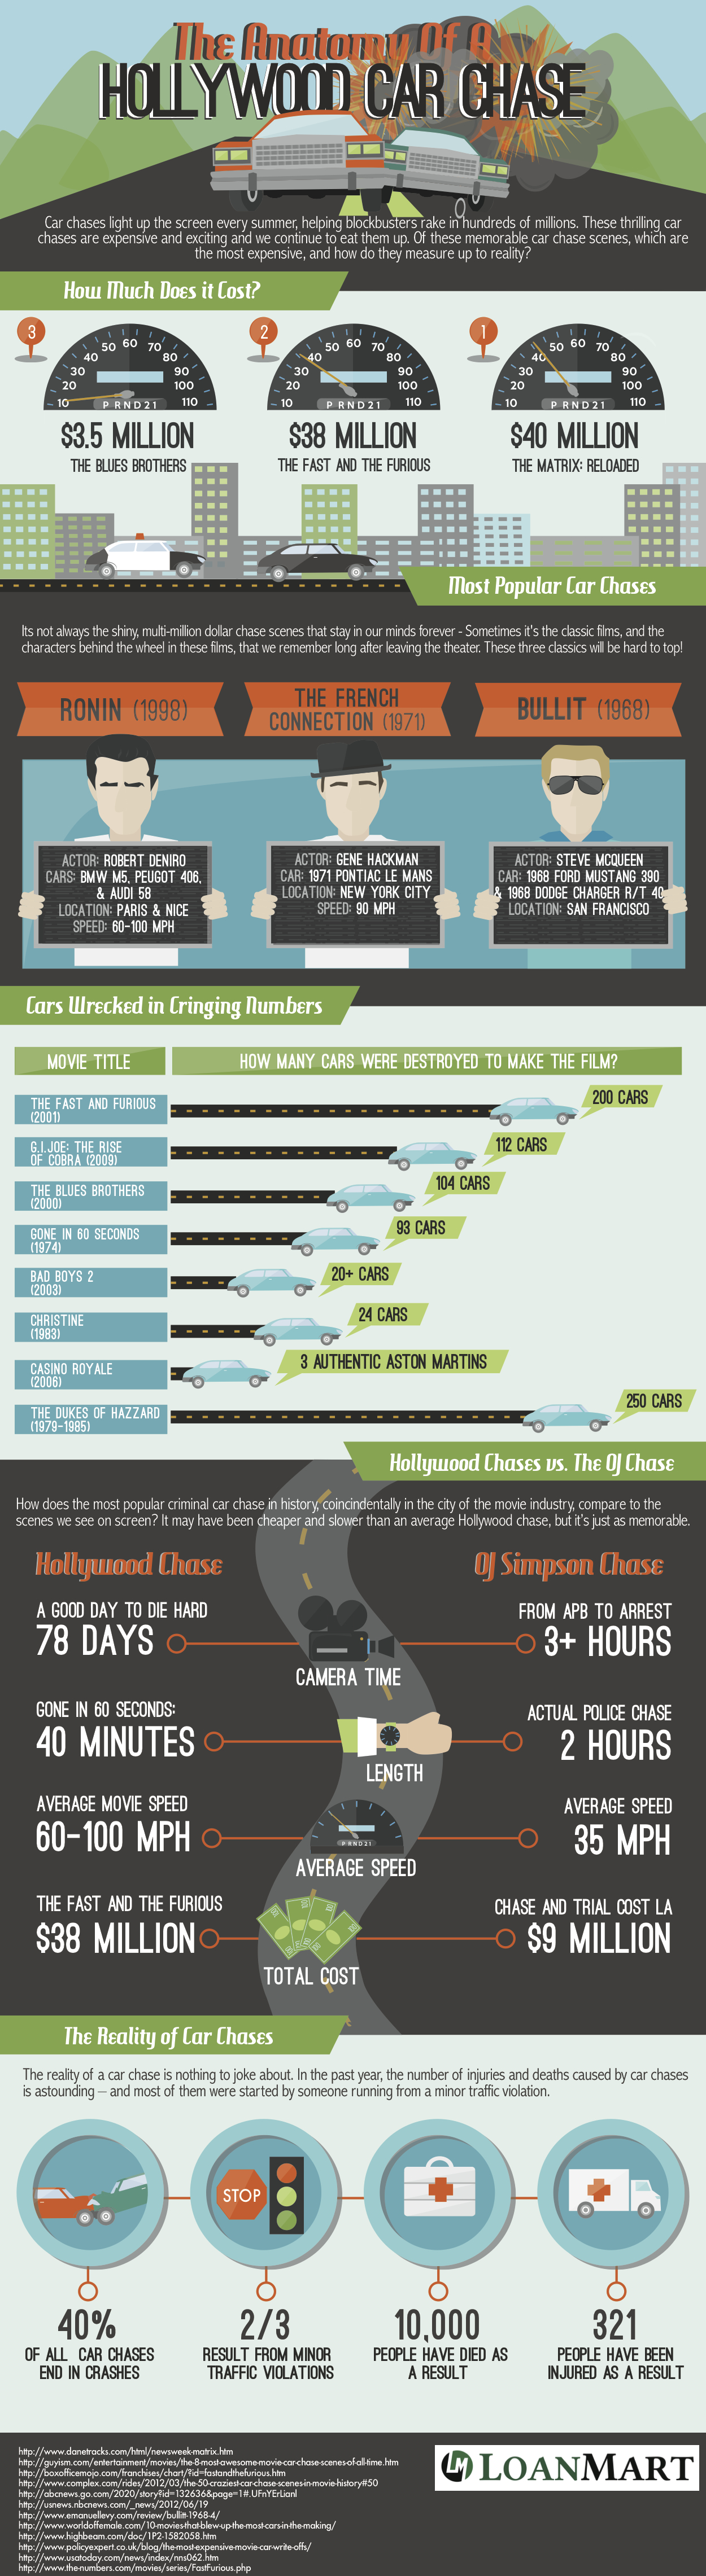 The Anatomy of a Hollywood Car Chase Infographic by 800LoanMart